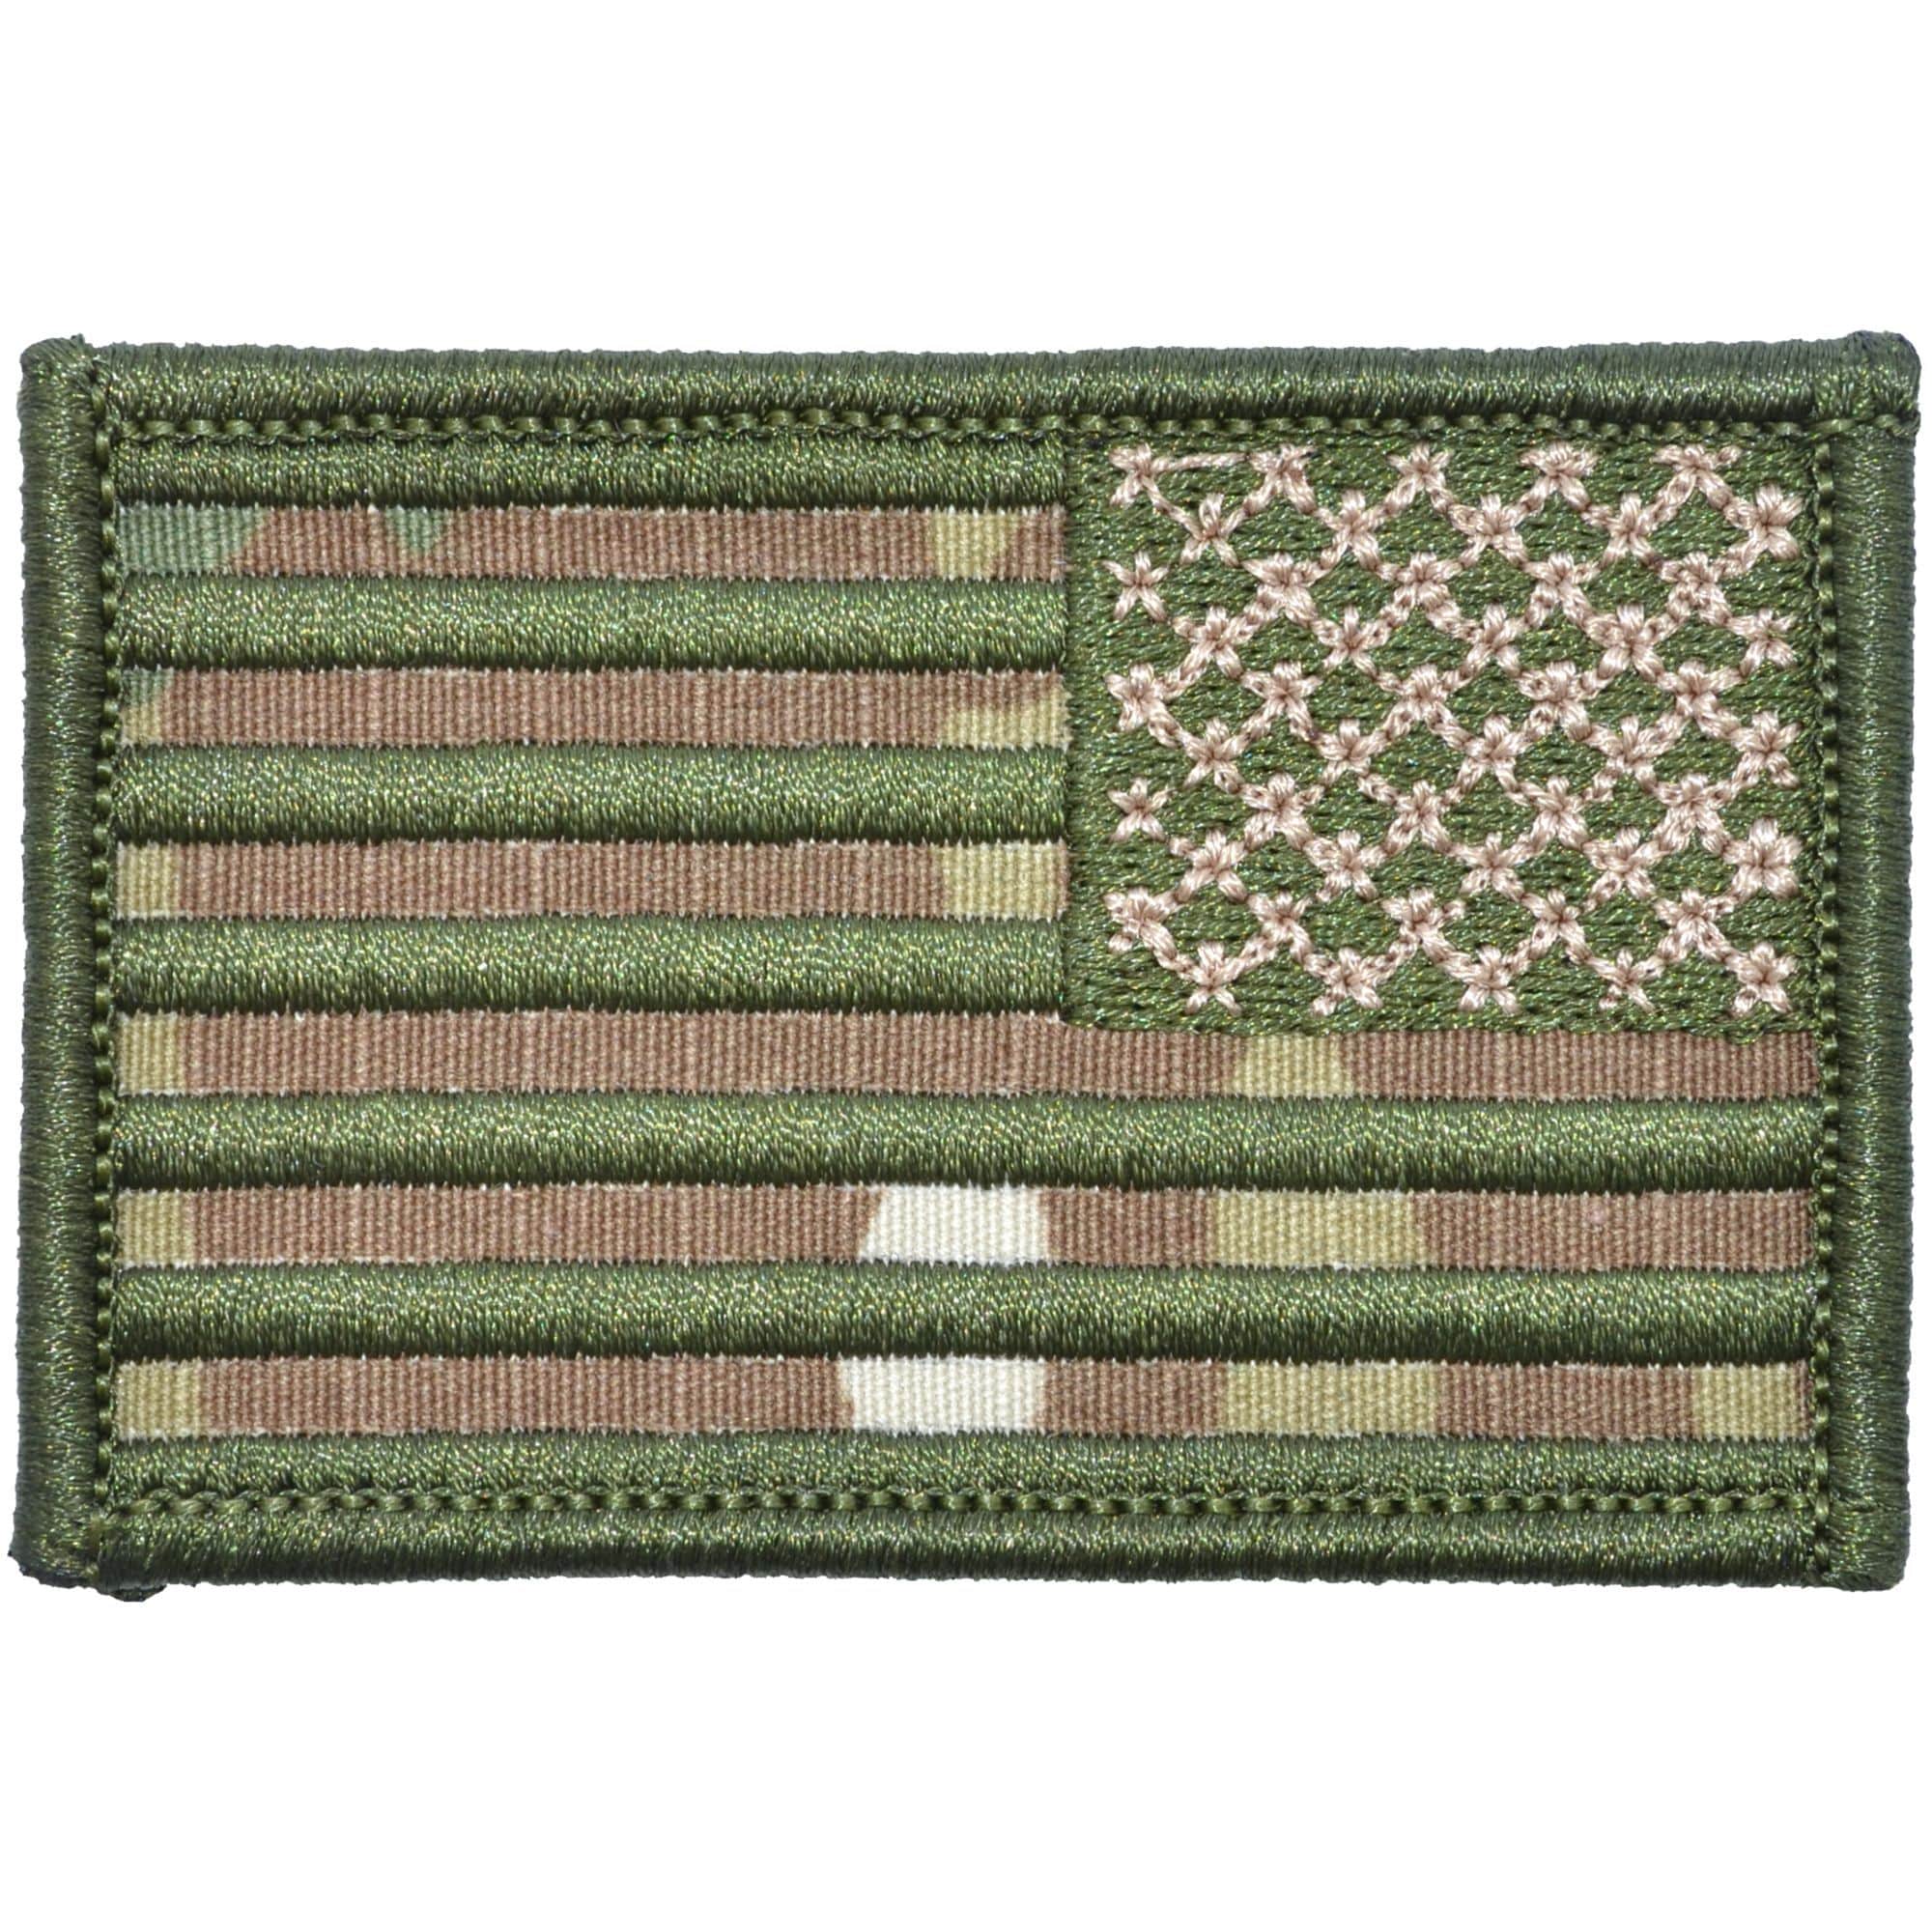 Tactical Gear Junkie Patches Right Face (Reverse) MultiCam USA Camo Flag with Green Stitching - 2x3 Patch